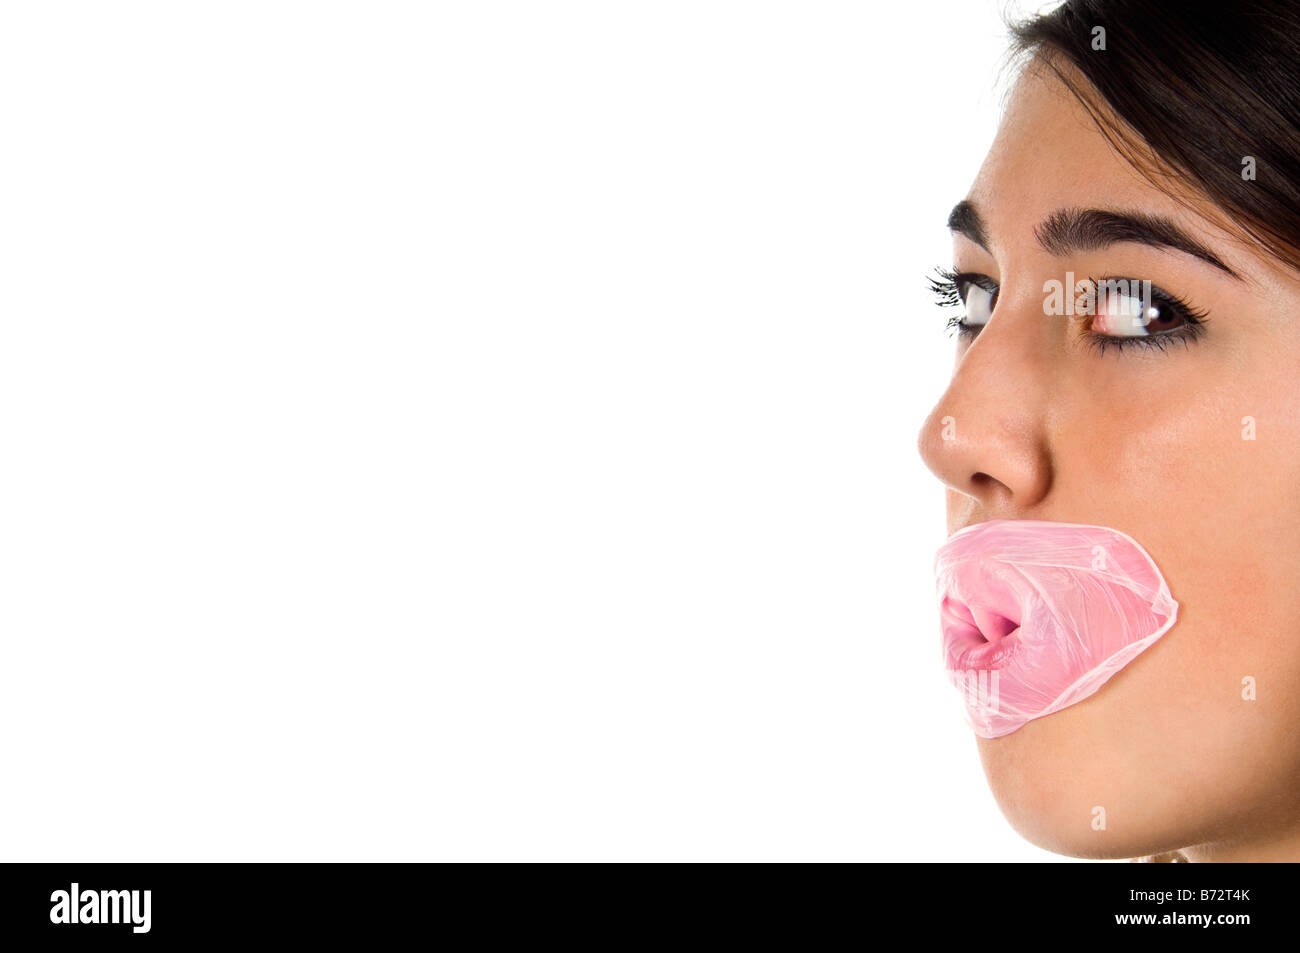 Horizontal close up portrait of a young teenage girl with pink bubblegum burst all over her face against a white background Stock Photo